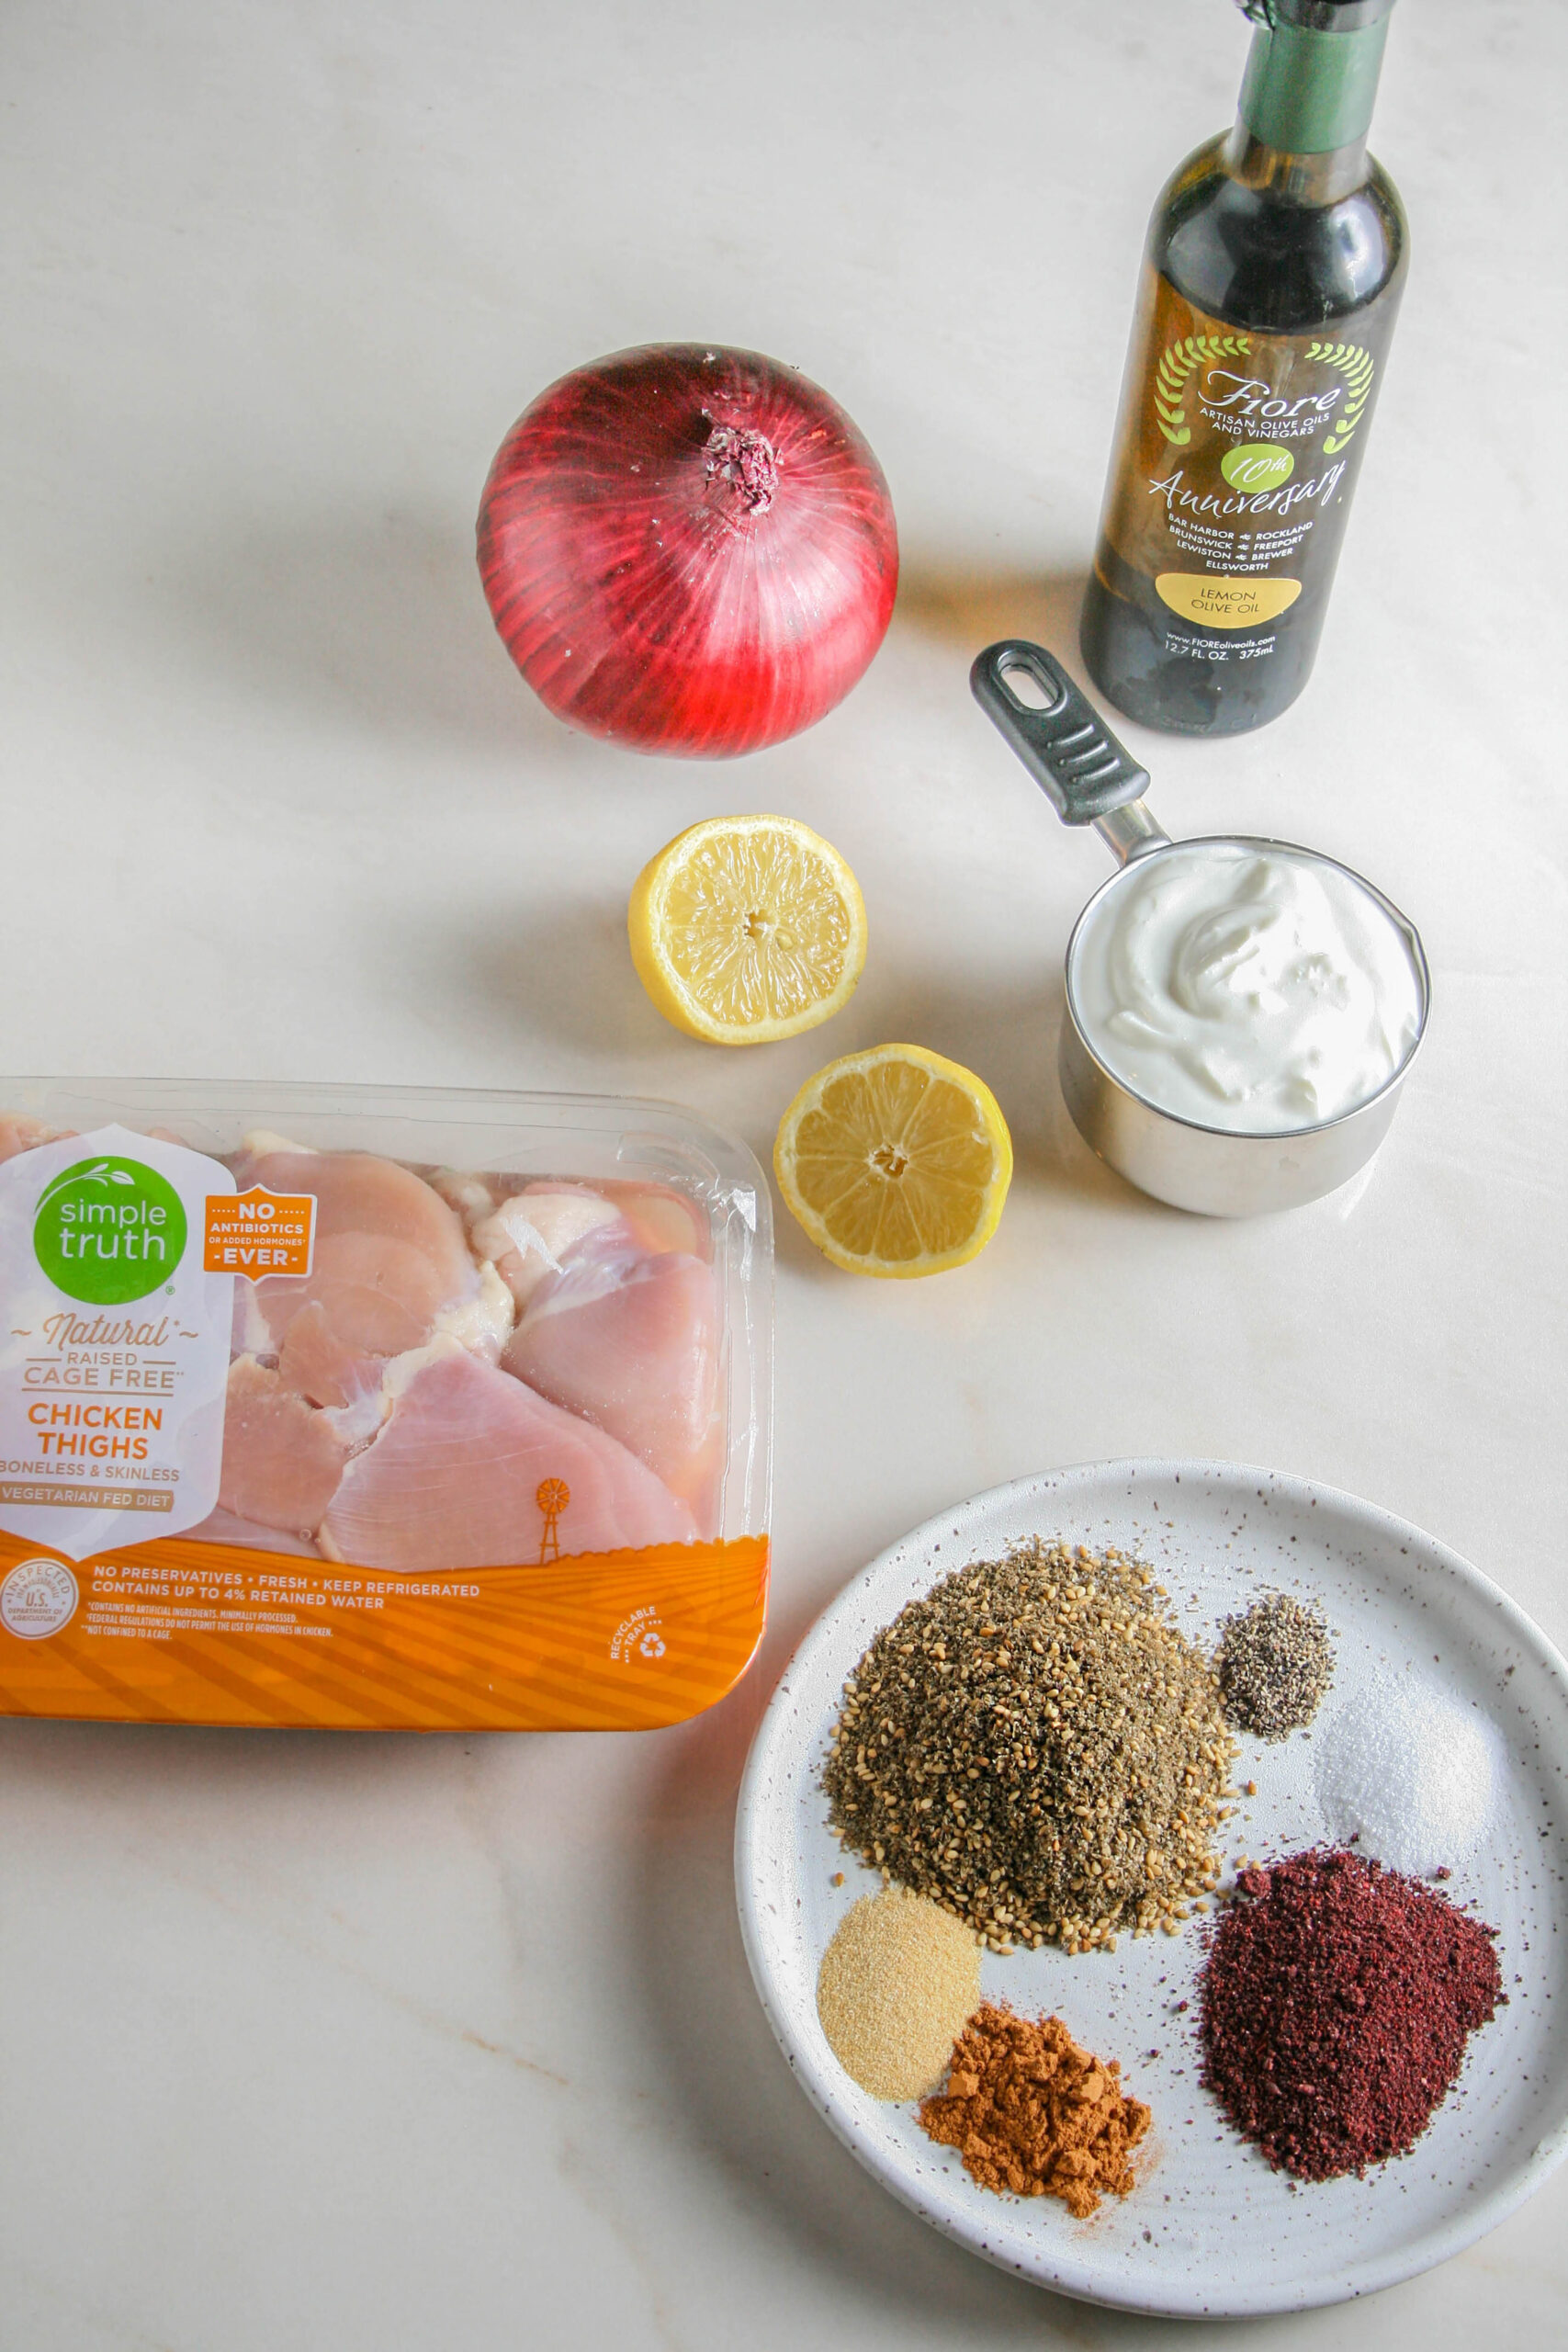 Ingredients for Za'atar Grilled Chicken Thighs